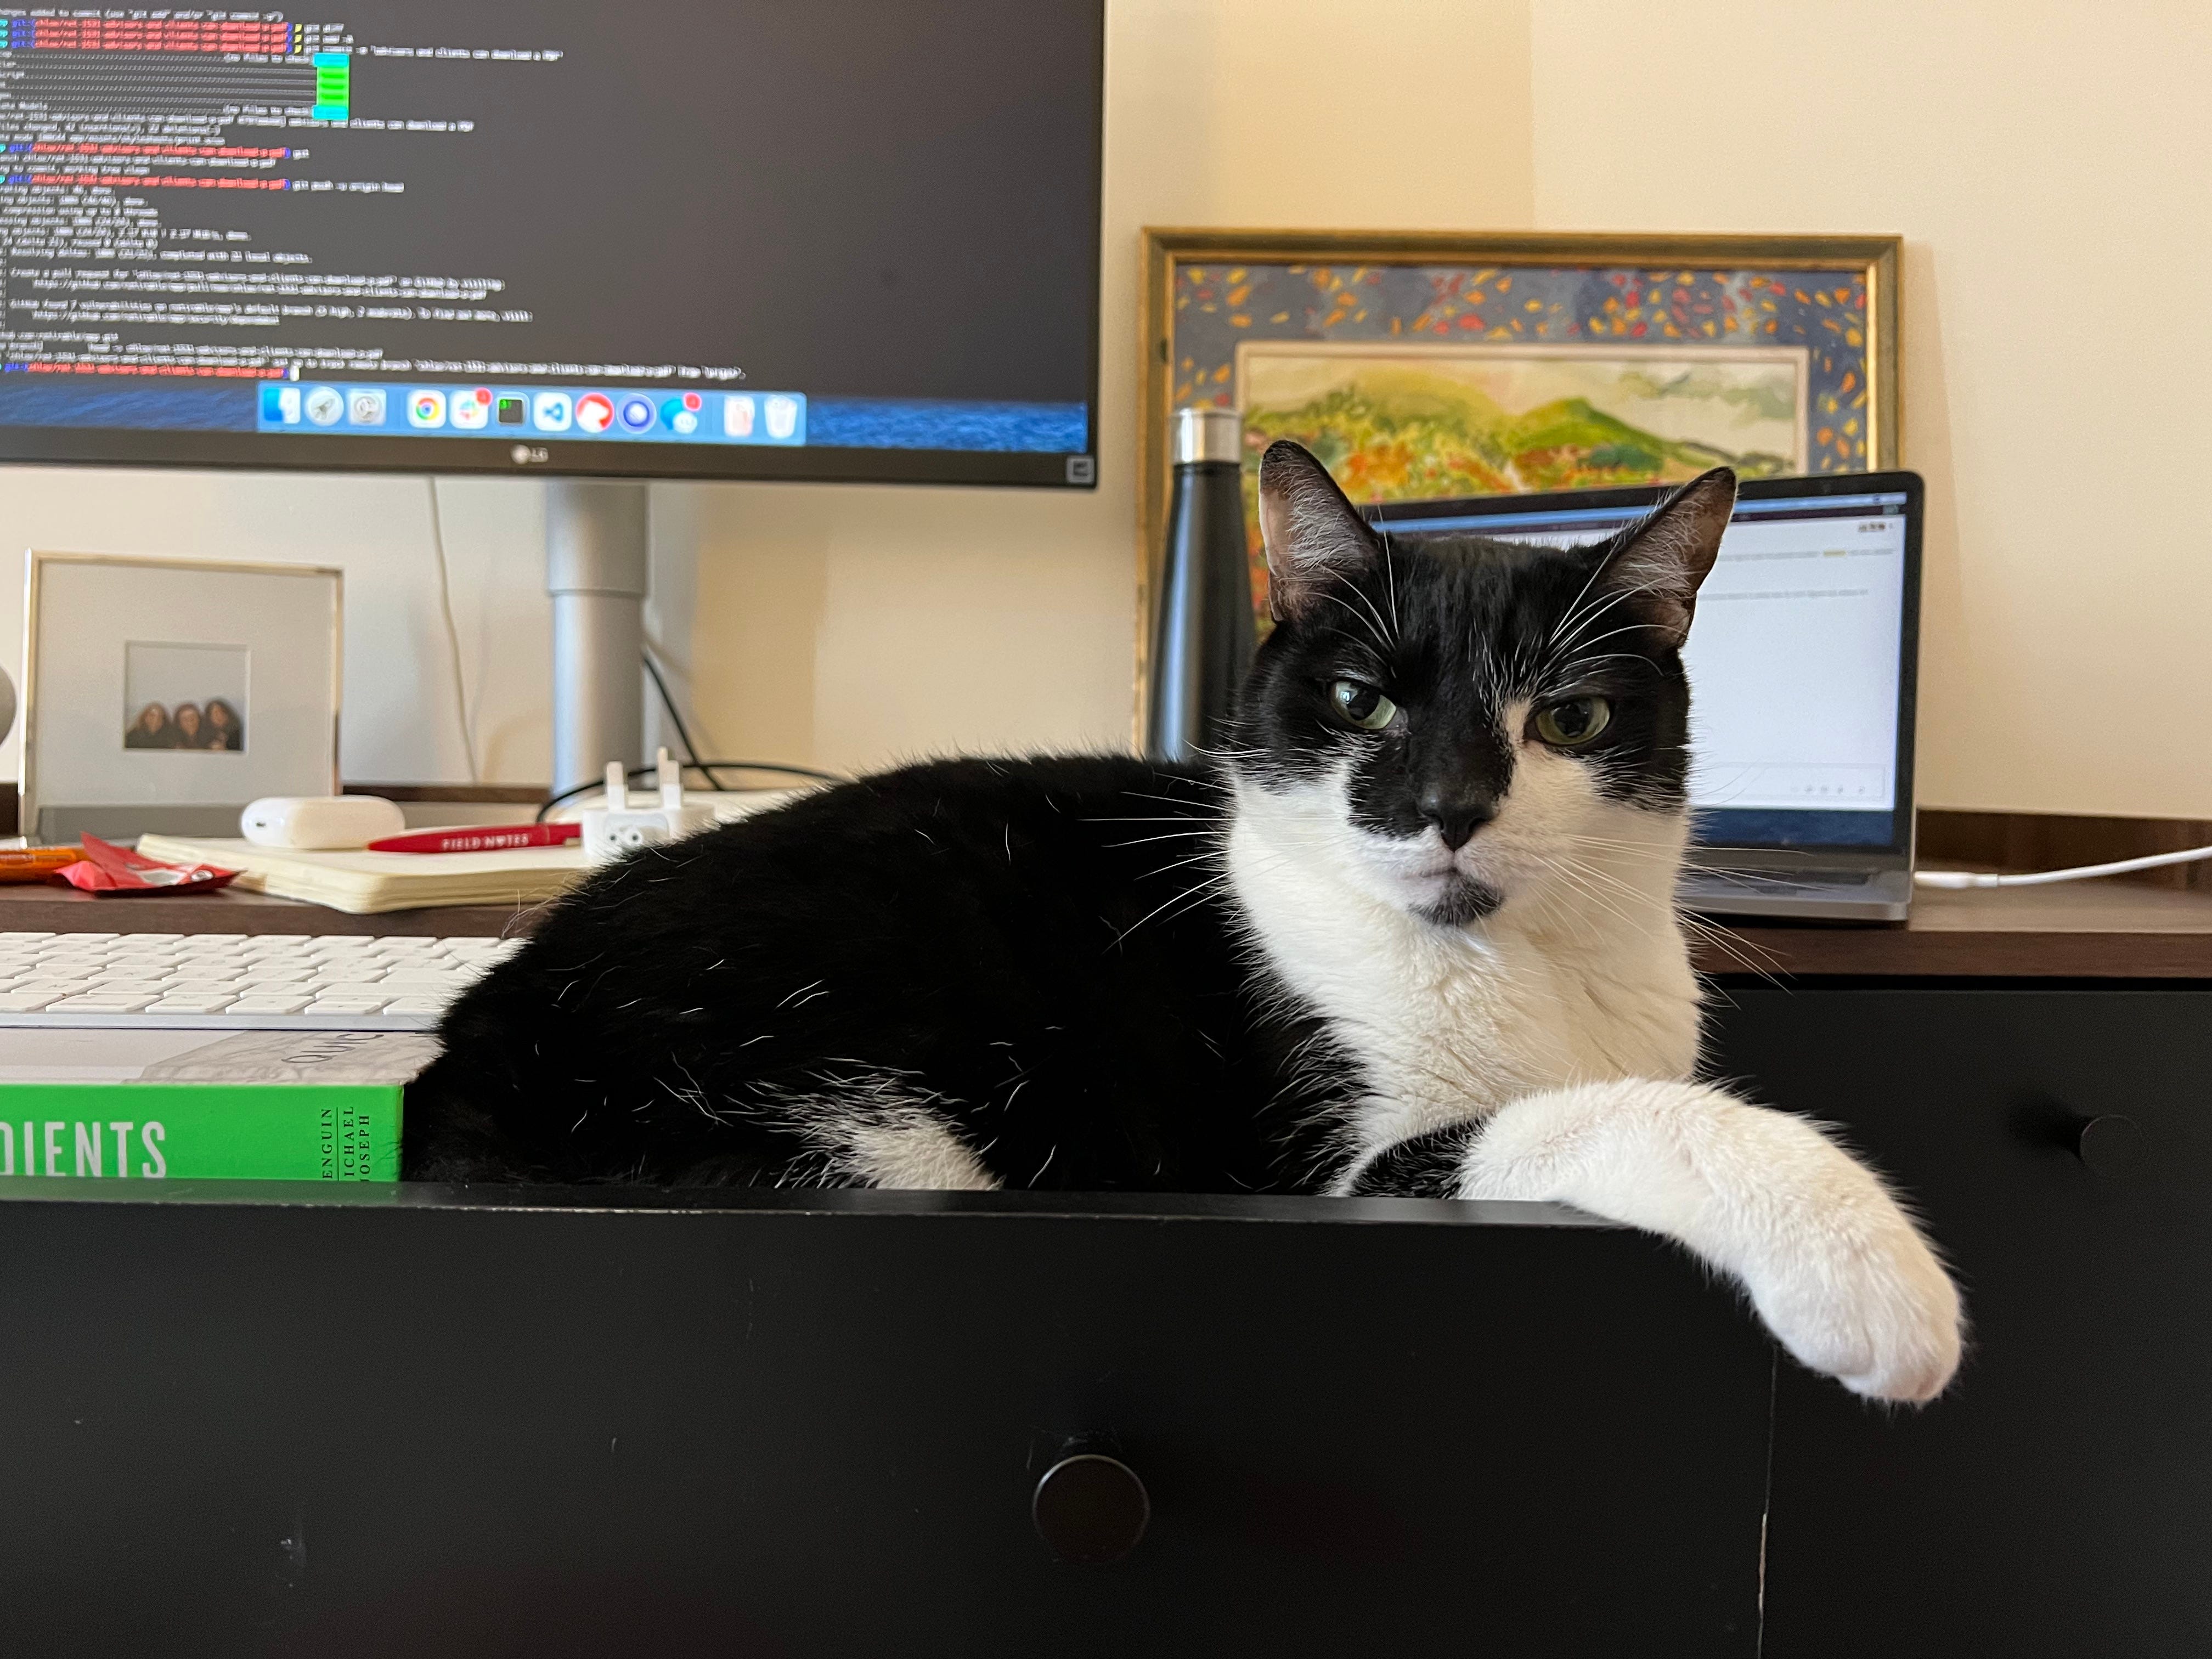 A black and white cat sits inside of a desk drawer, blocking access to a computer.